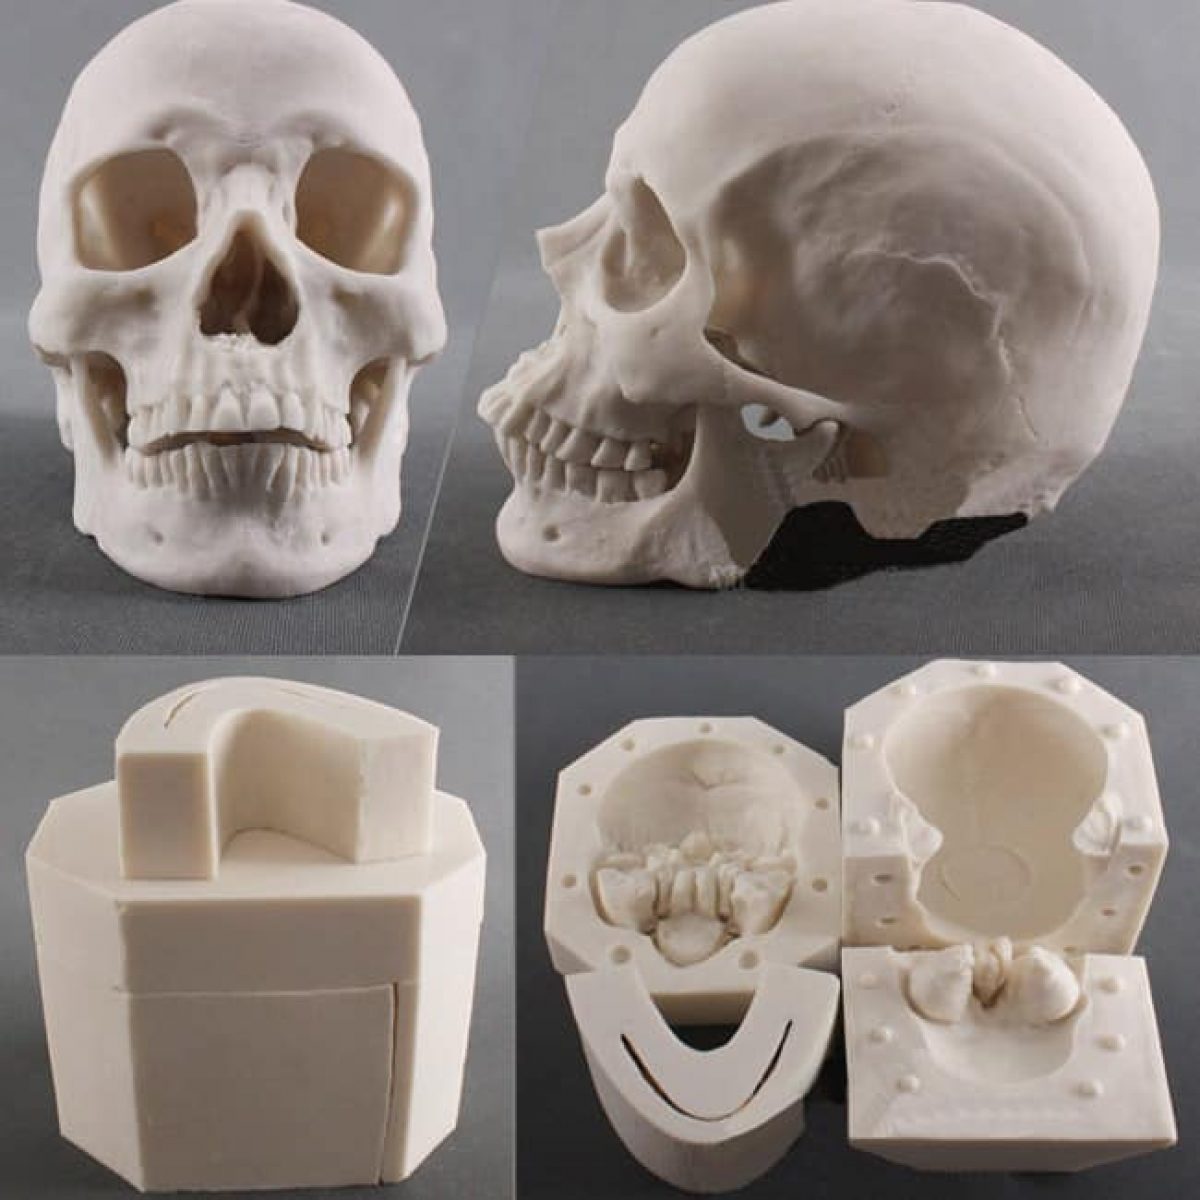 https://lcmolds.com/wp-content/uploads/2022/03/3D-Silicone-Skull-Molds-Actual-Size-1-1200x1200.jpg